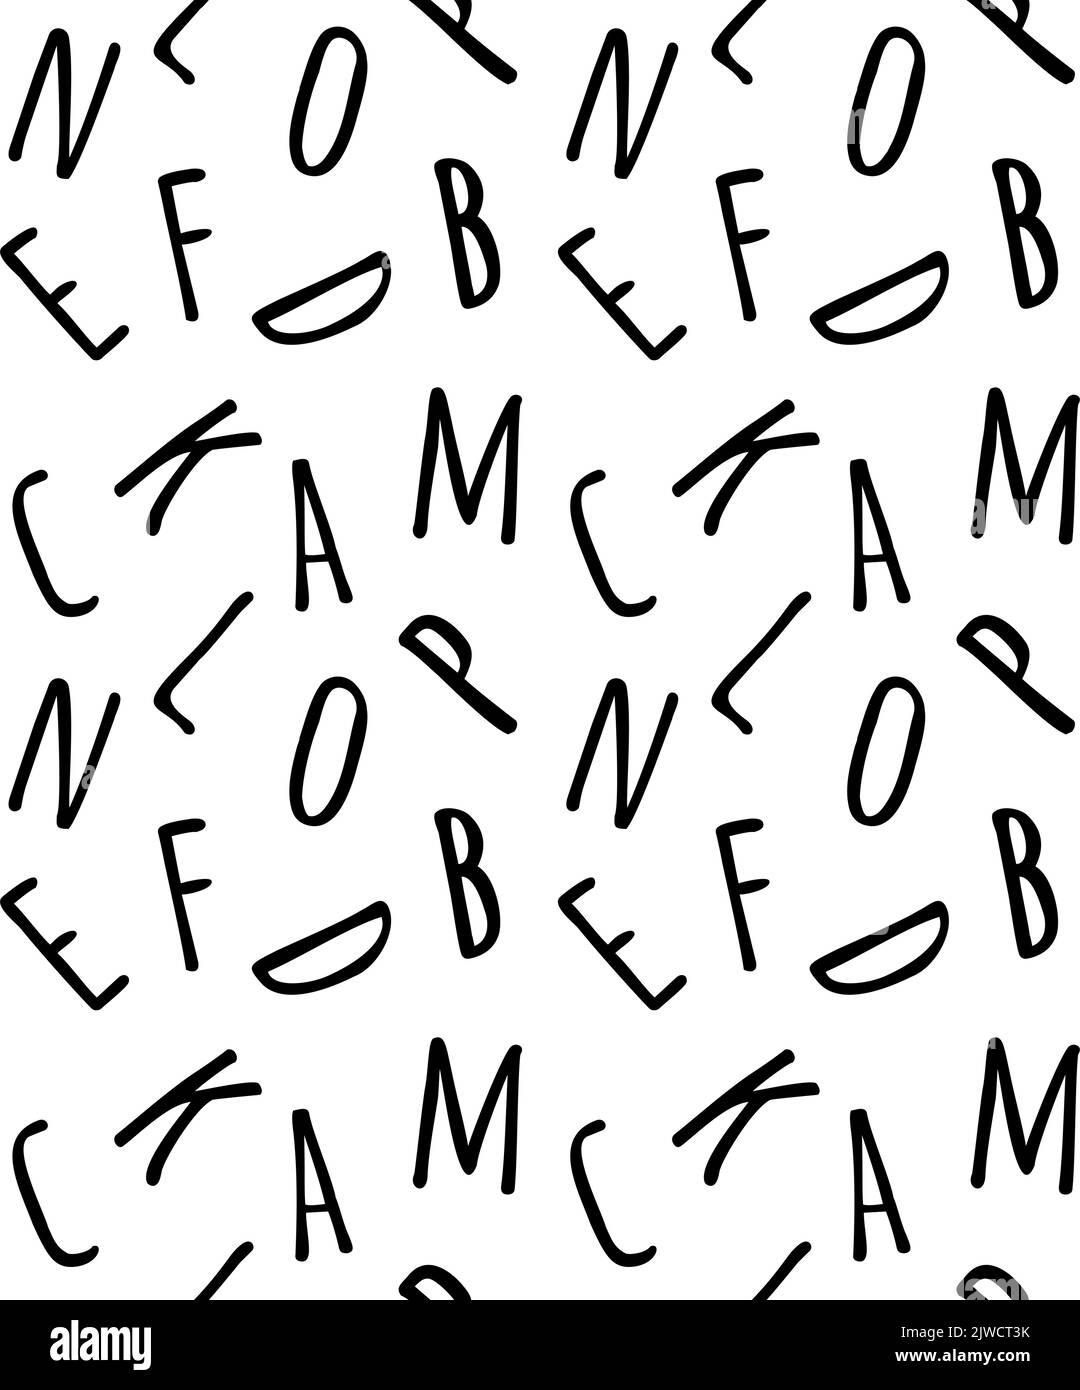 Vector seamless pattern of hand drawn sketch doodle letters isolated on white background Stock Vector